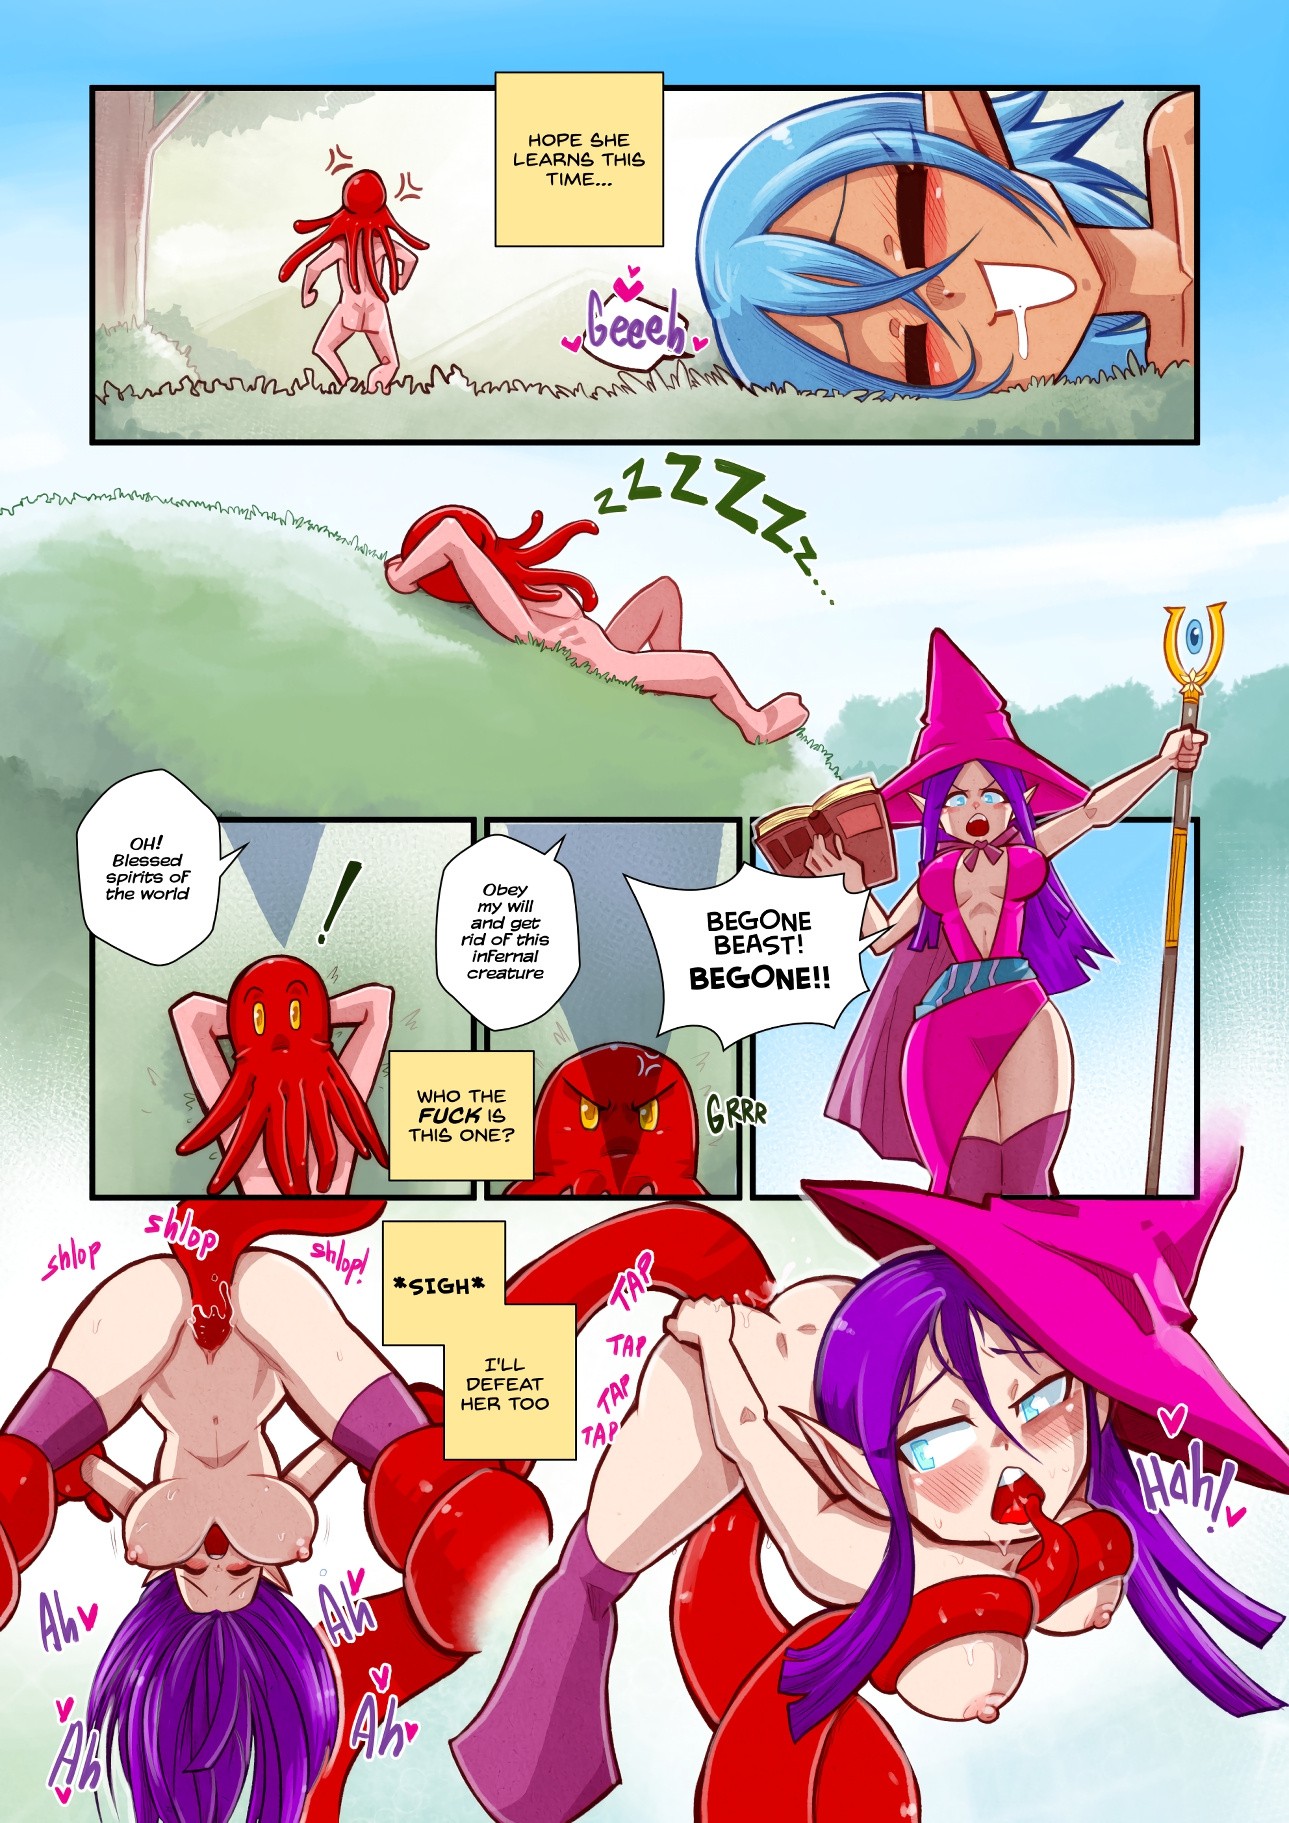 Life as a Tentacle Monster in Another World porn comic picture 9